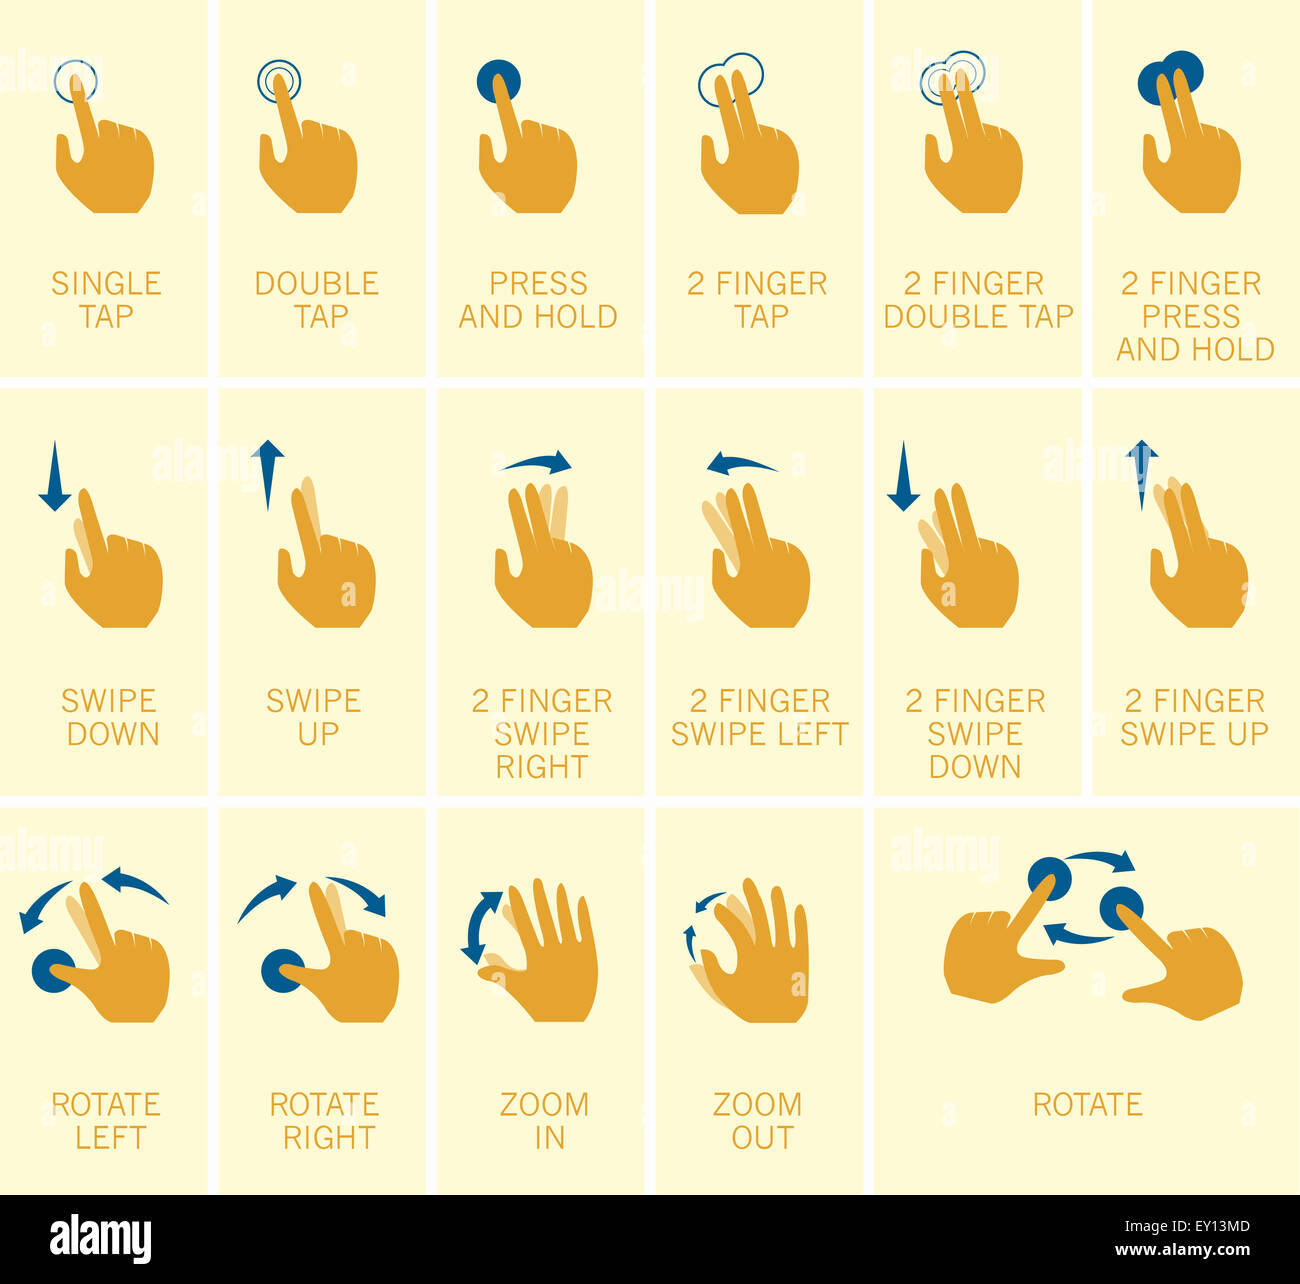 Illustration of hand gestures for touchscreen Stock Photo